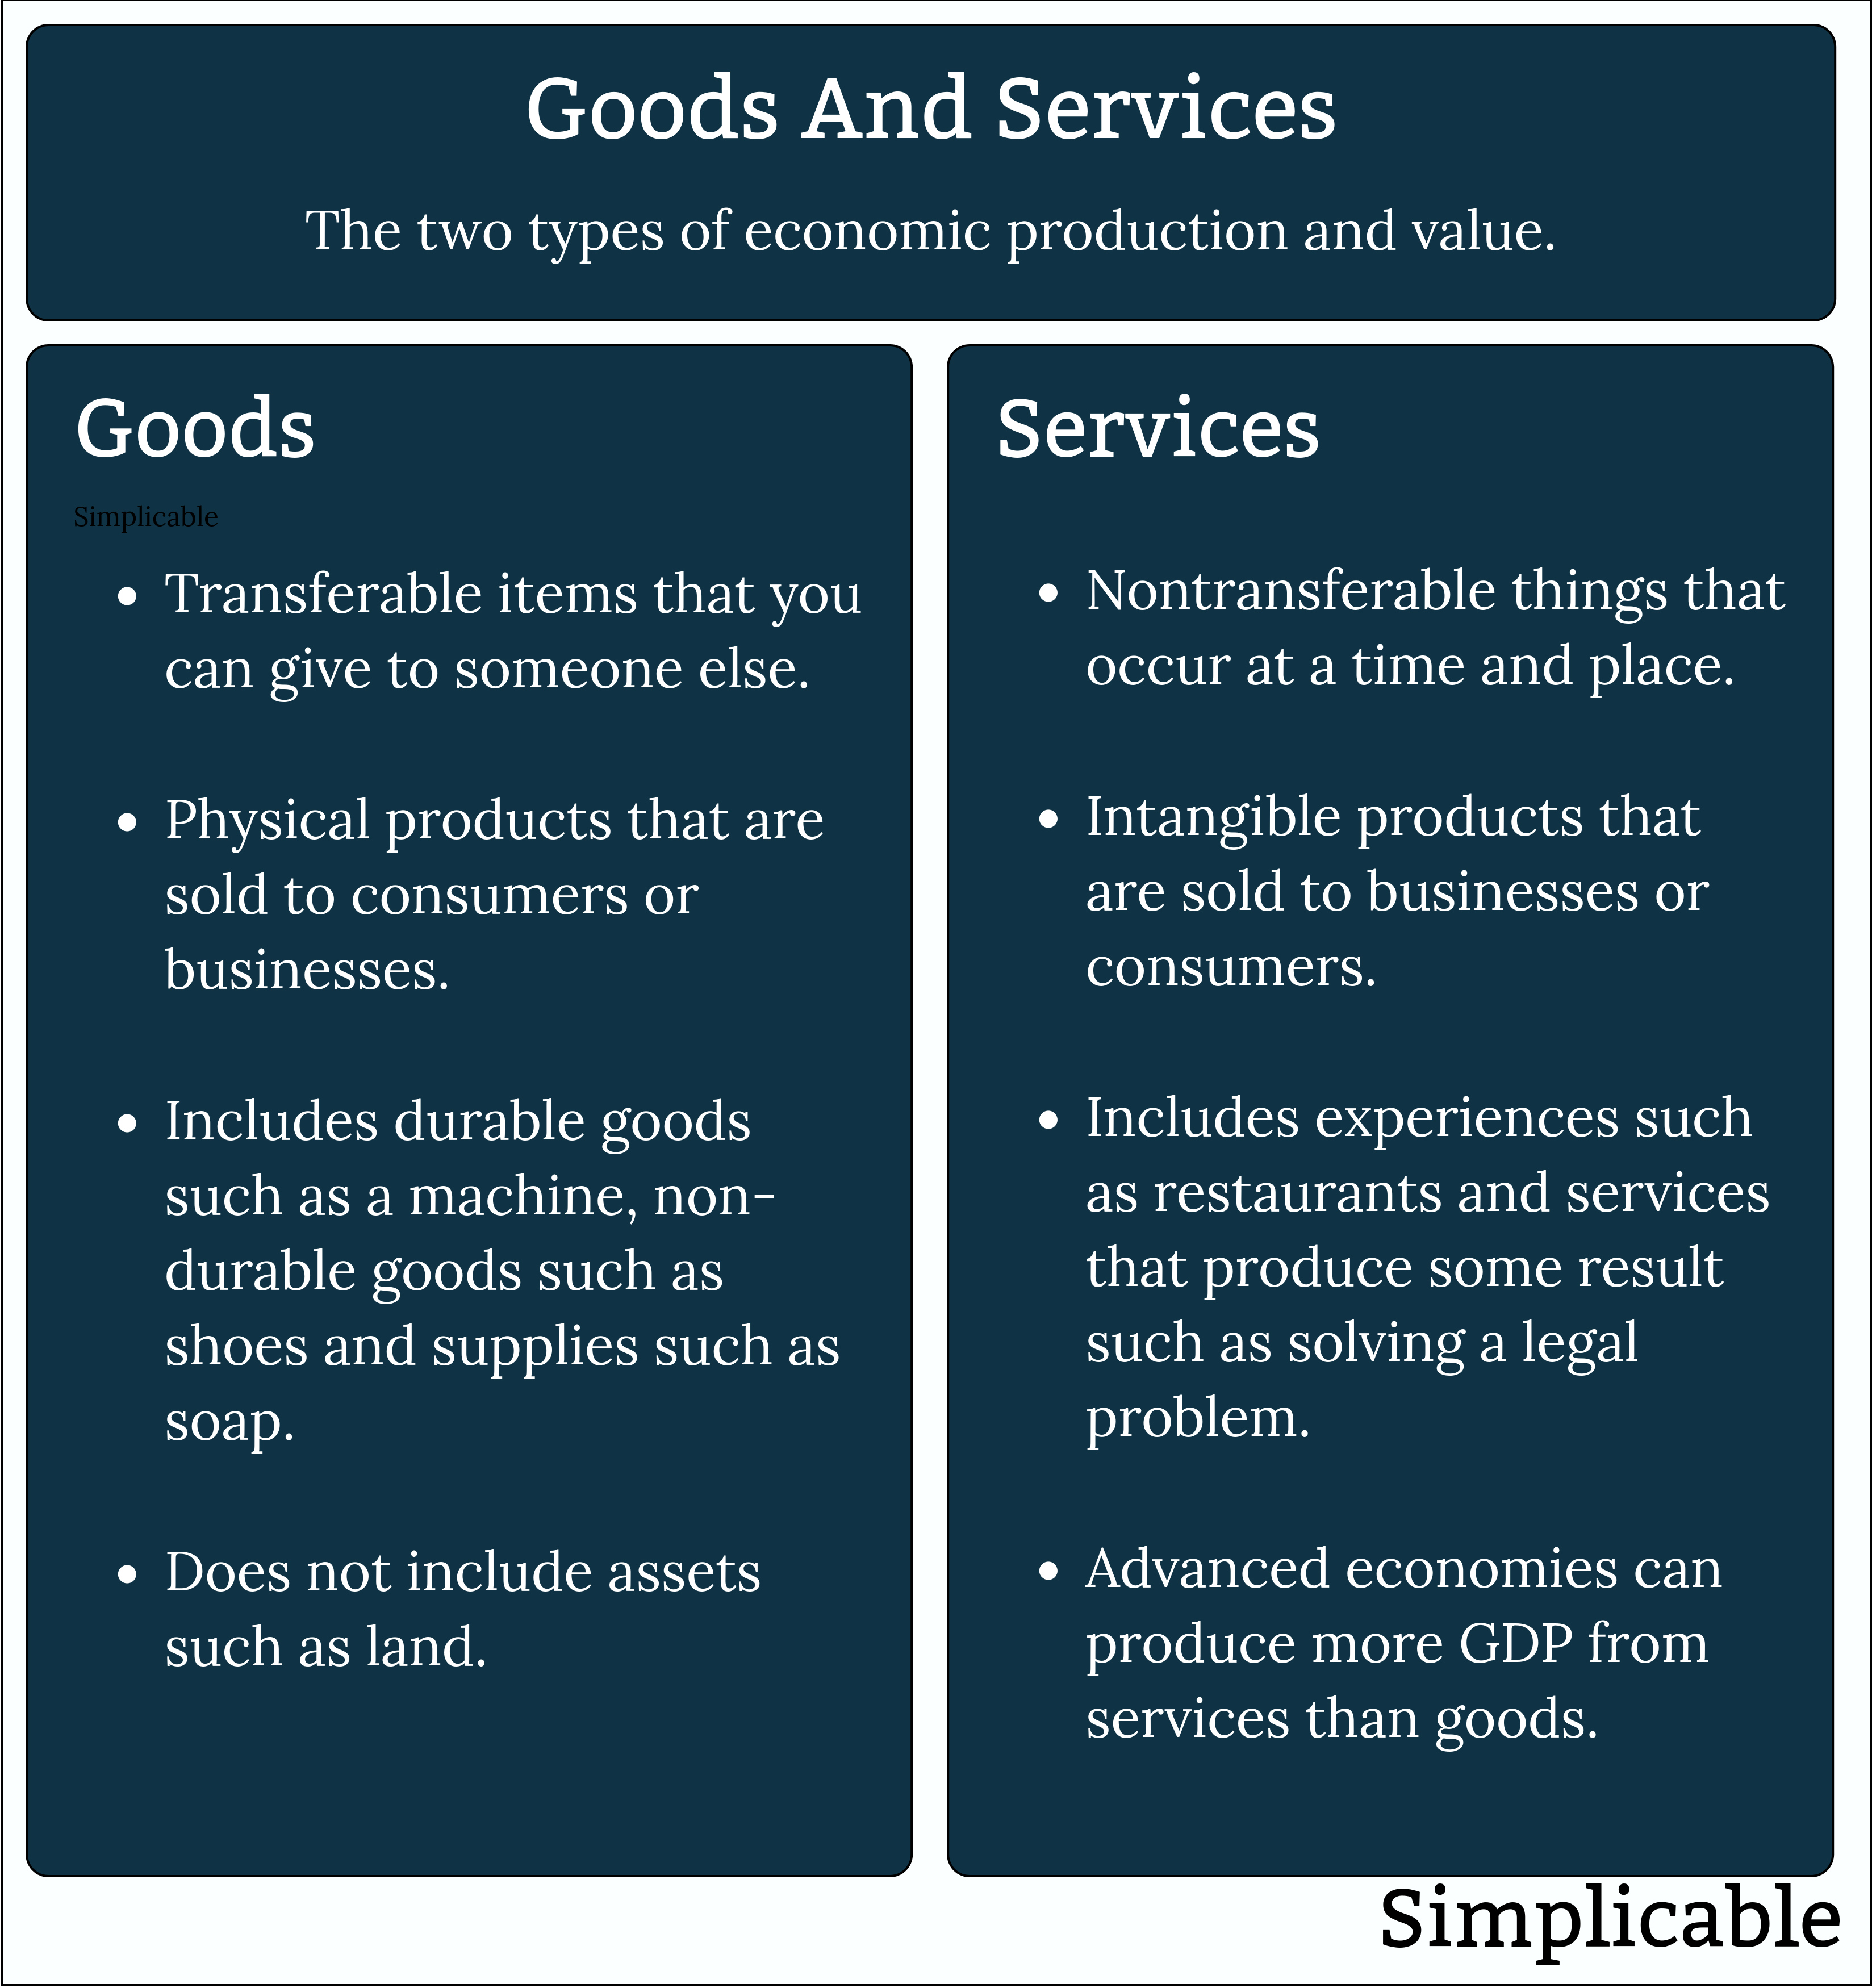 goods and services comparison and discussion